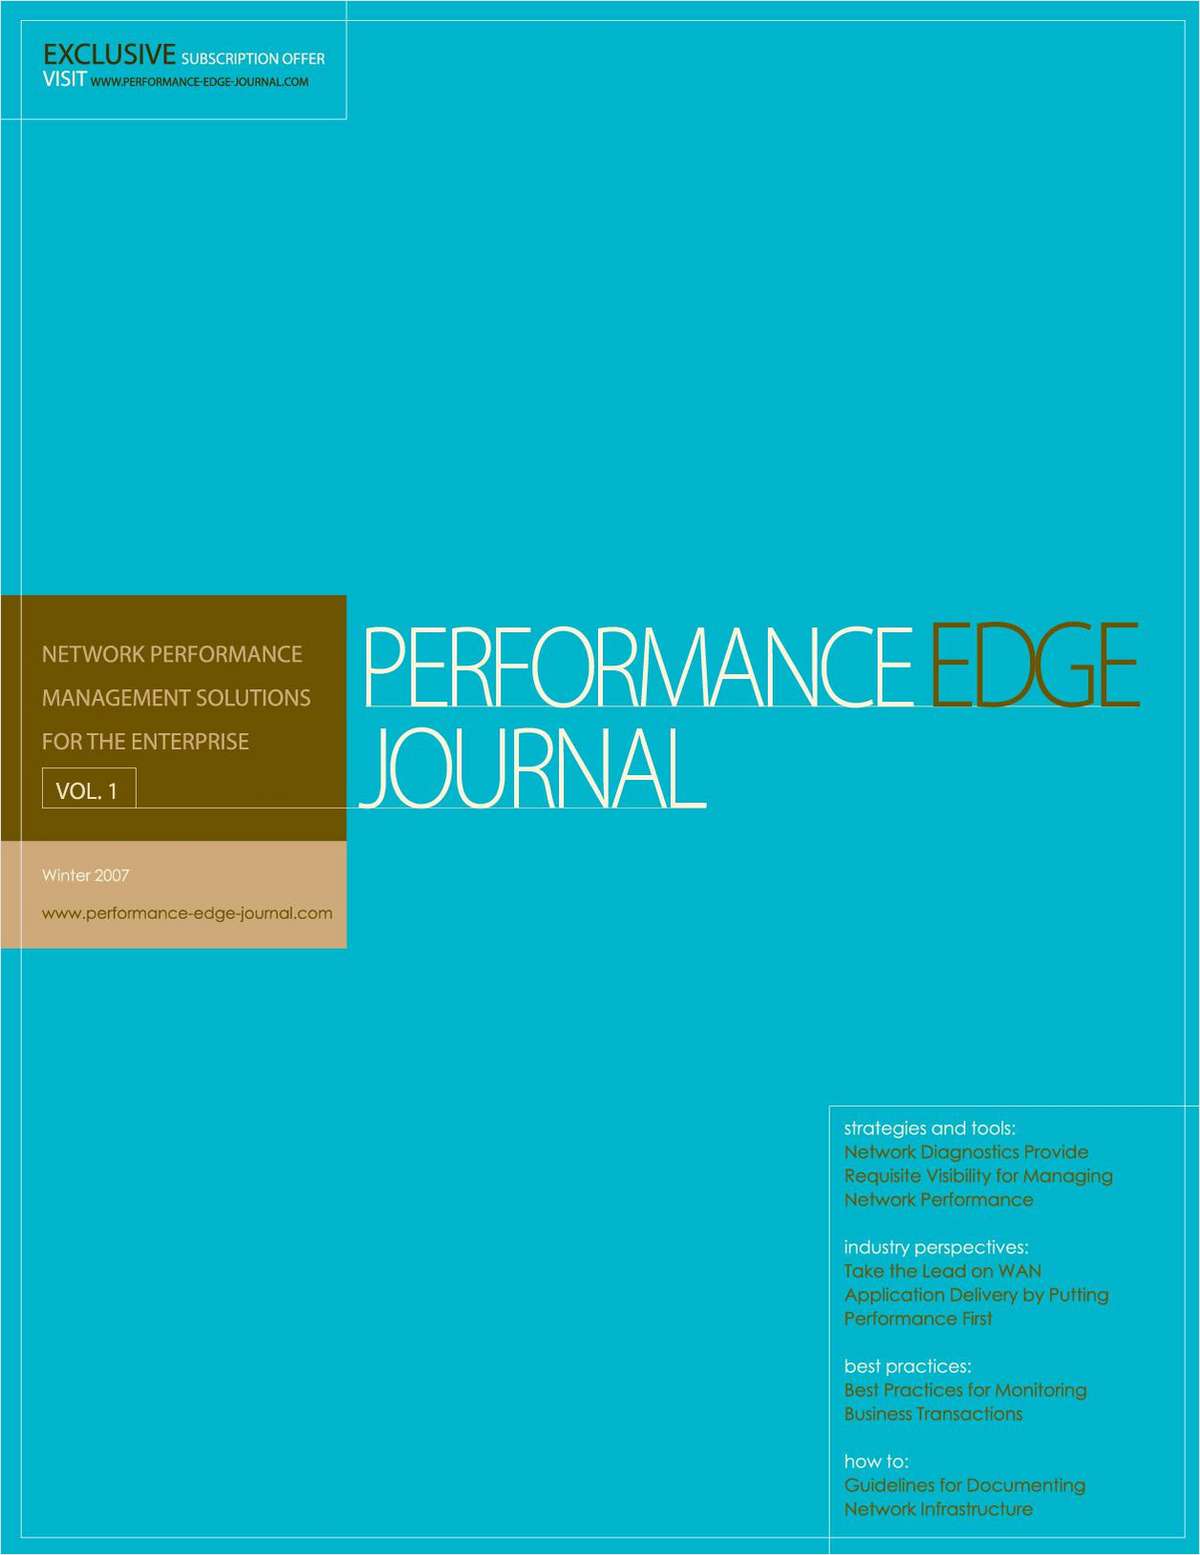 Network Performance Edge Journal — Case studies, tools and tips for managing network performance